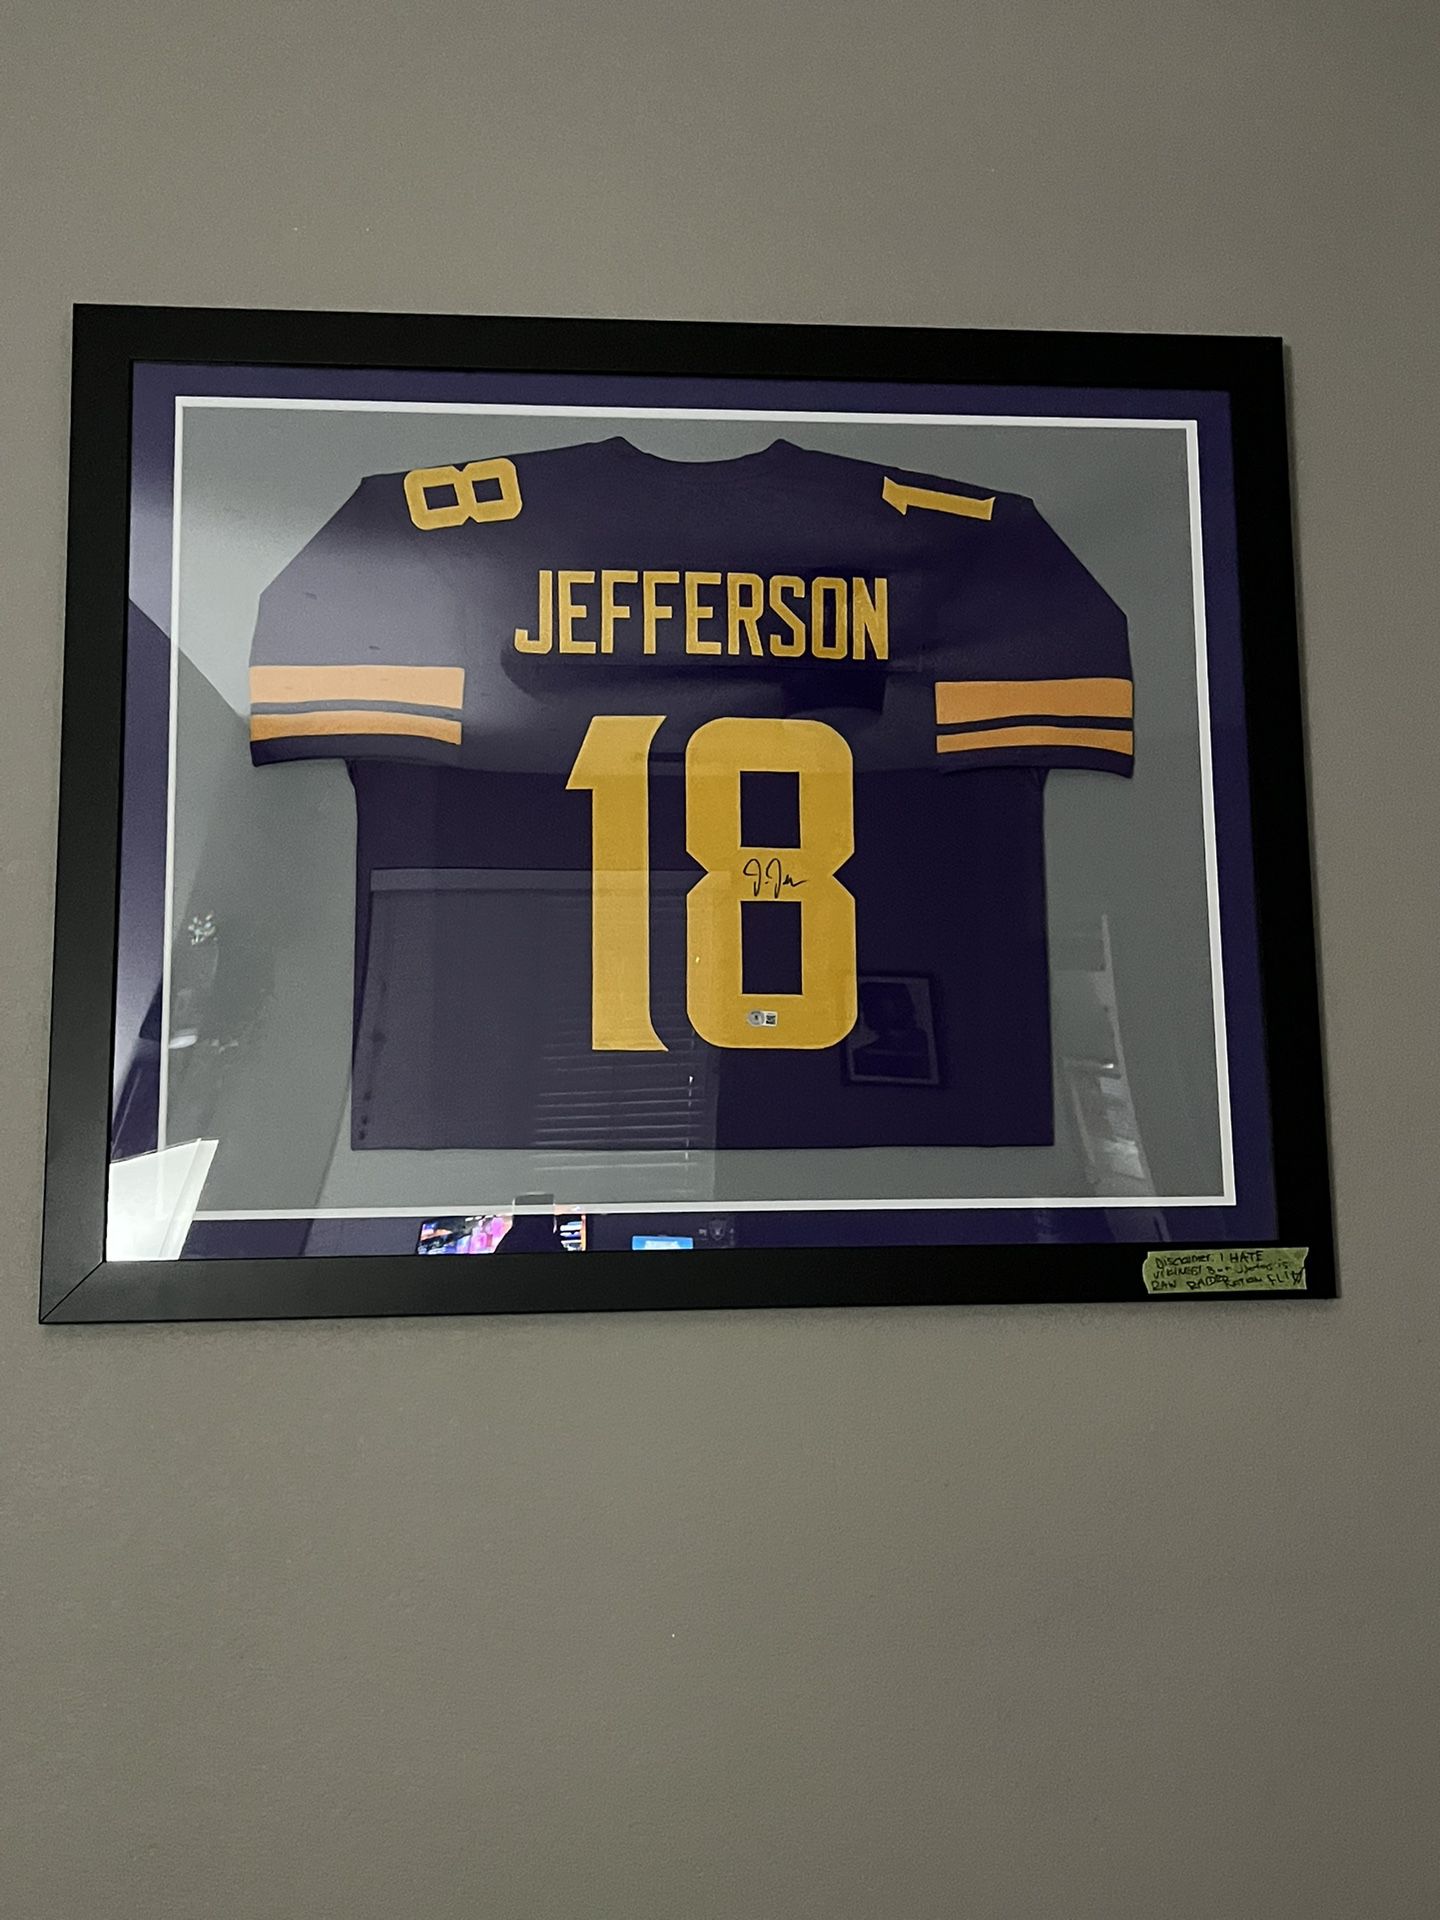 Justin Jefferson Signed jersey for Sale in Salinas, CA - OfferUp